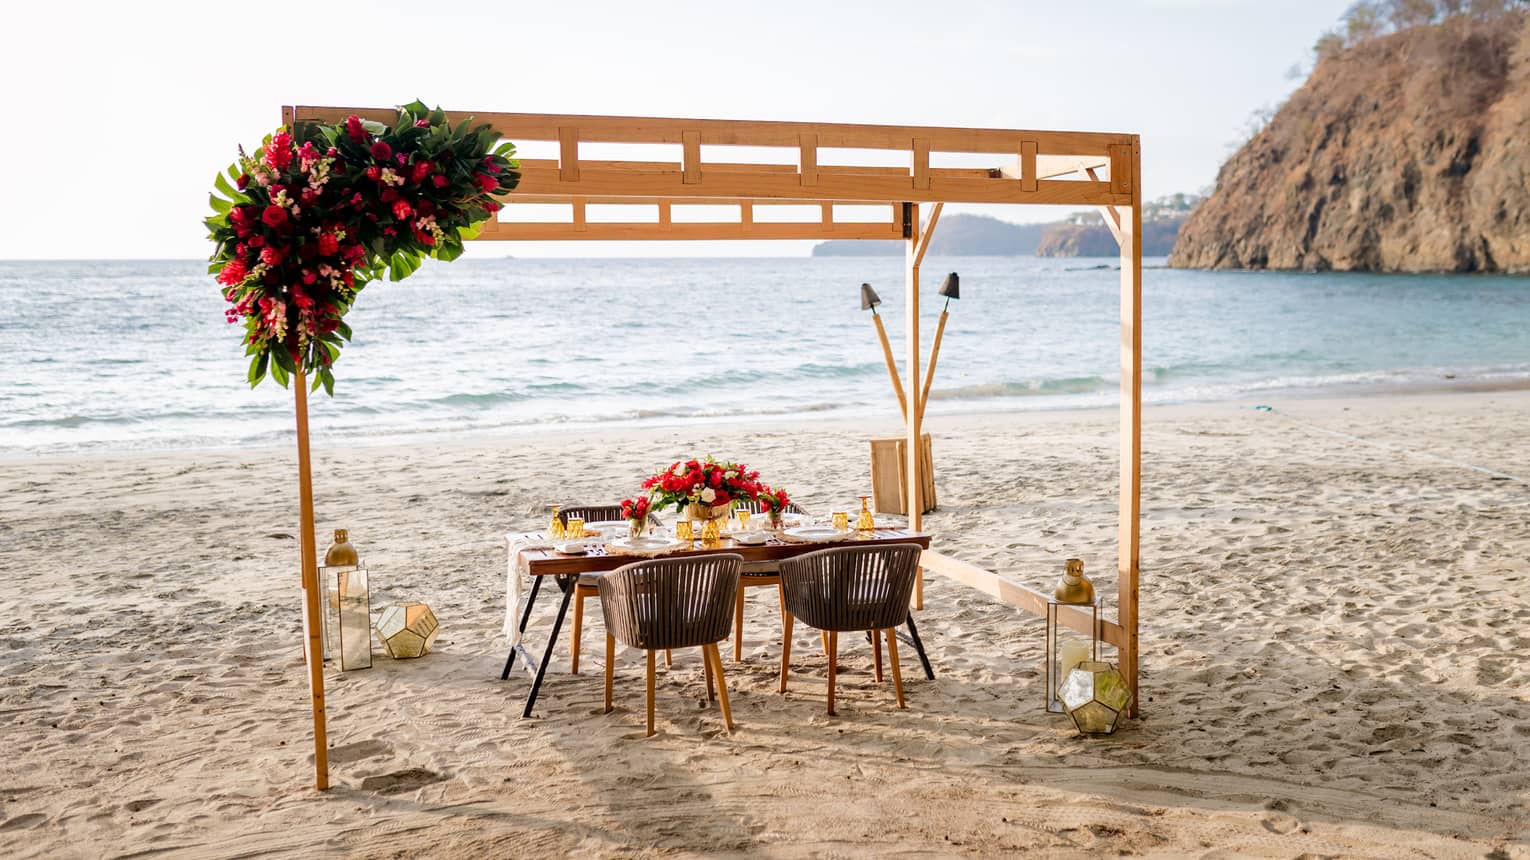 Under a pergola decorated with a vibrant bouquet of flowers, a table is set for four on the beach in the warm glow of sunset.